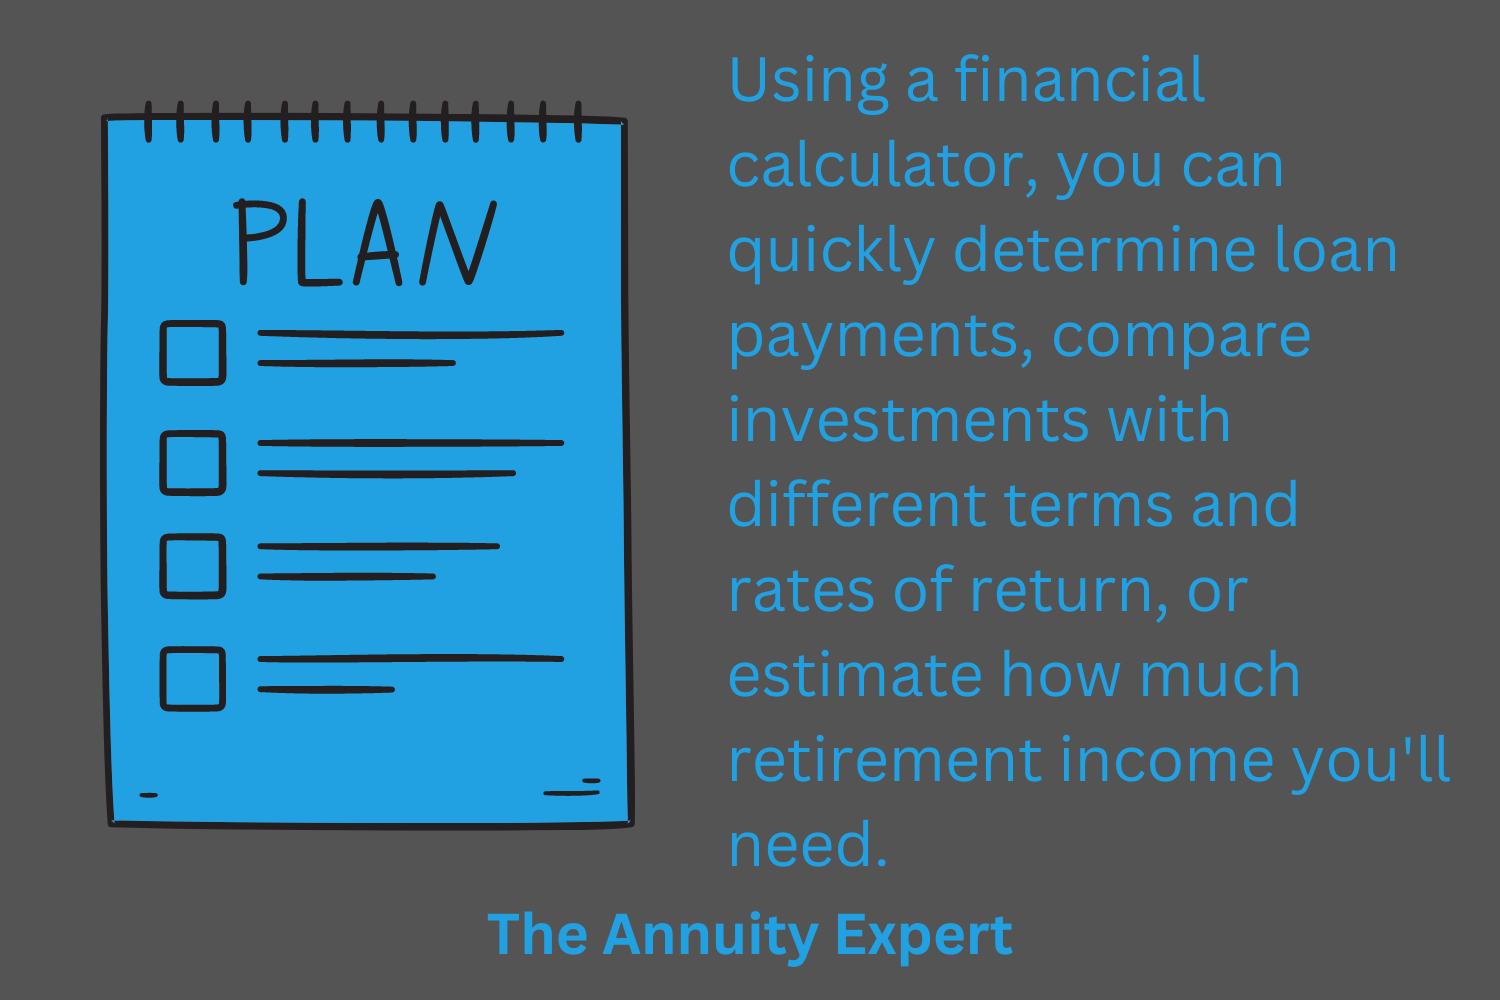 What Are The Different Functions Of Financial Calculators?